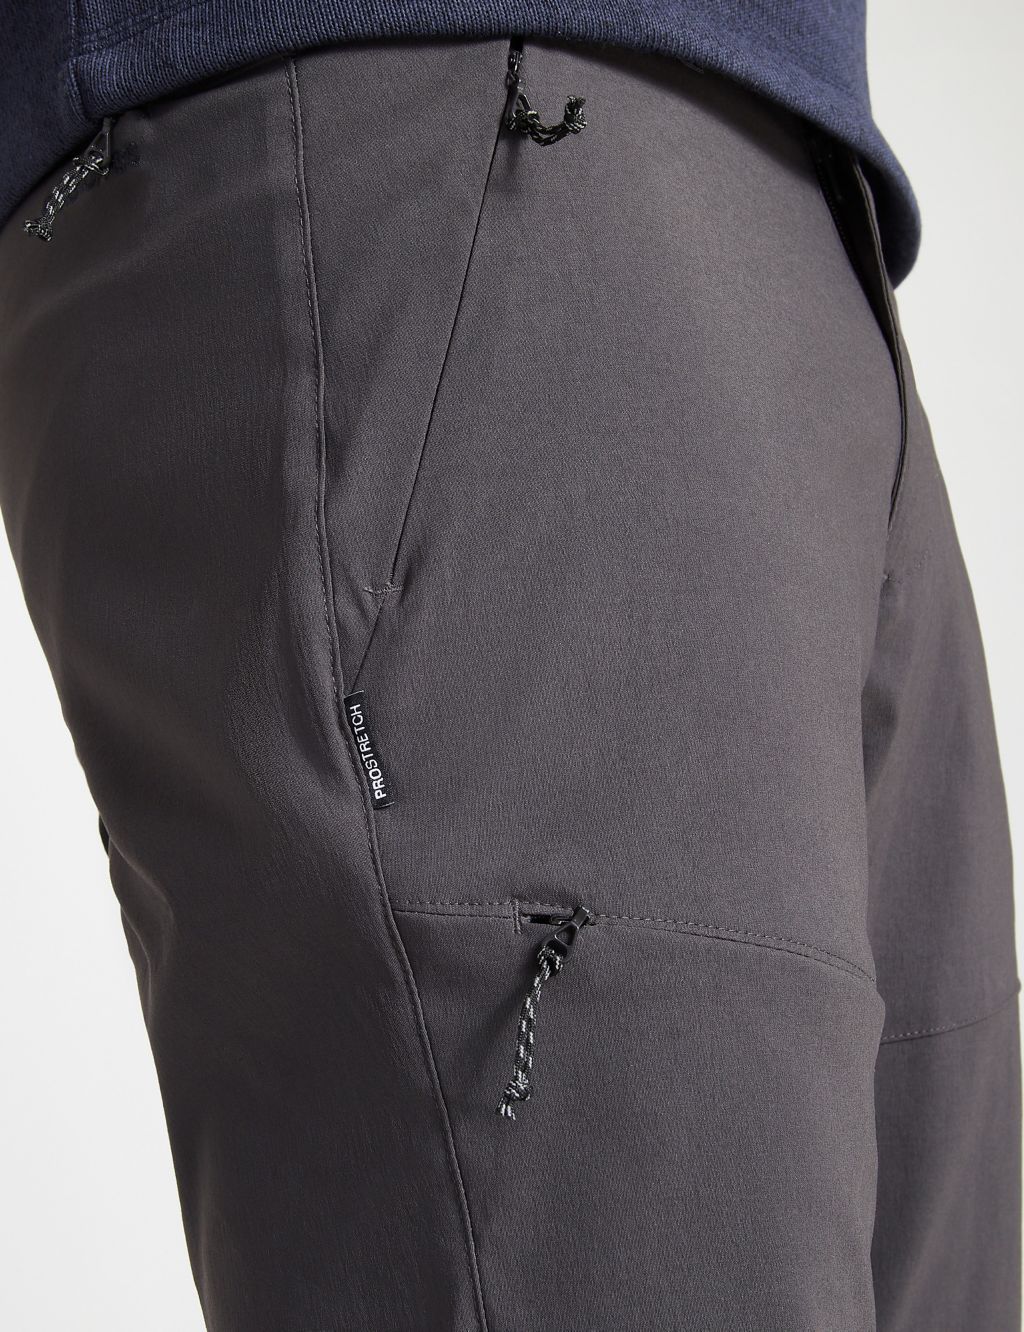 Kiwi Tailored Fit Stretch Trekking Trousers image 2